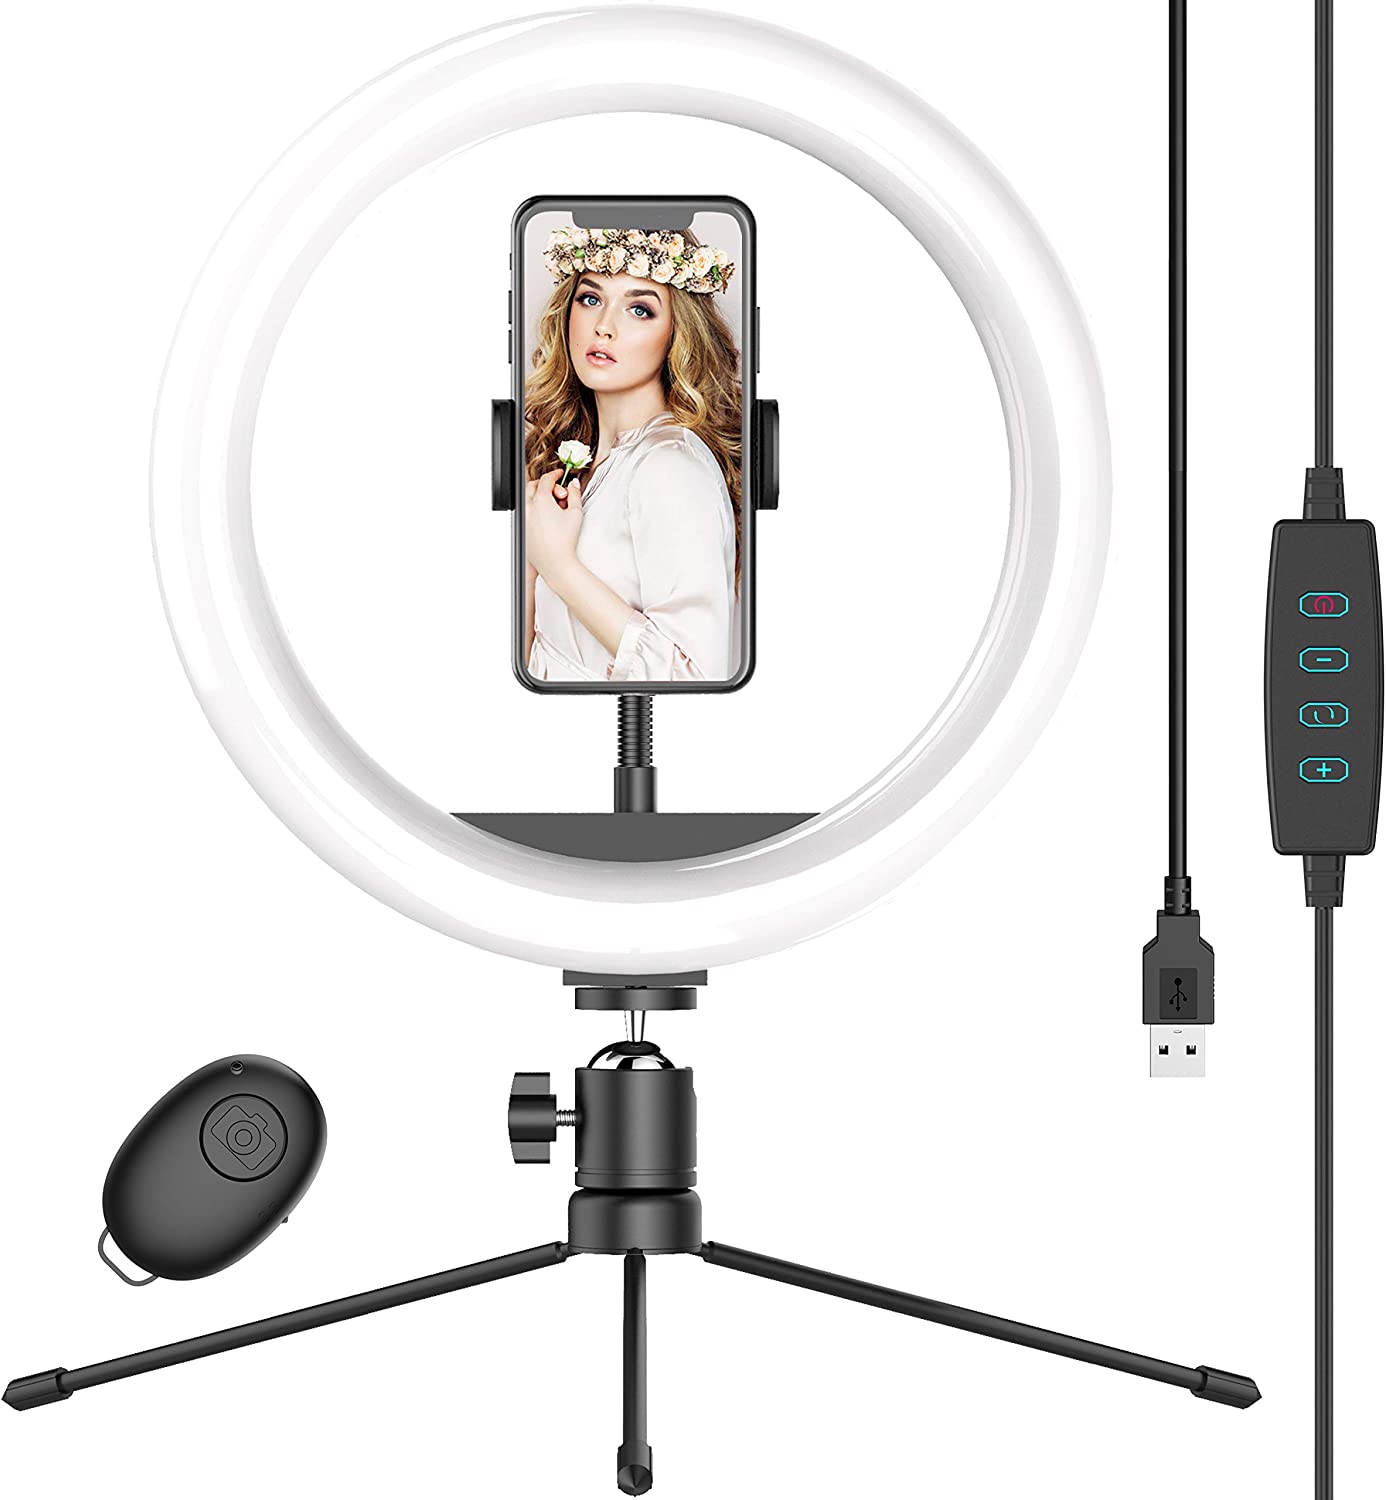 10" Selfie Ring Light with Tripod Stand & Phone Holder $5.99